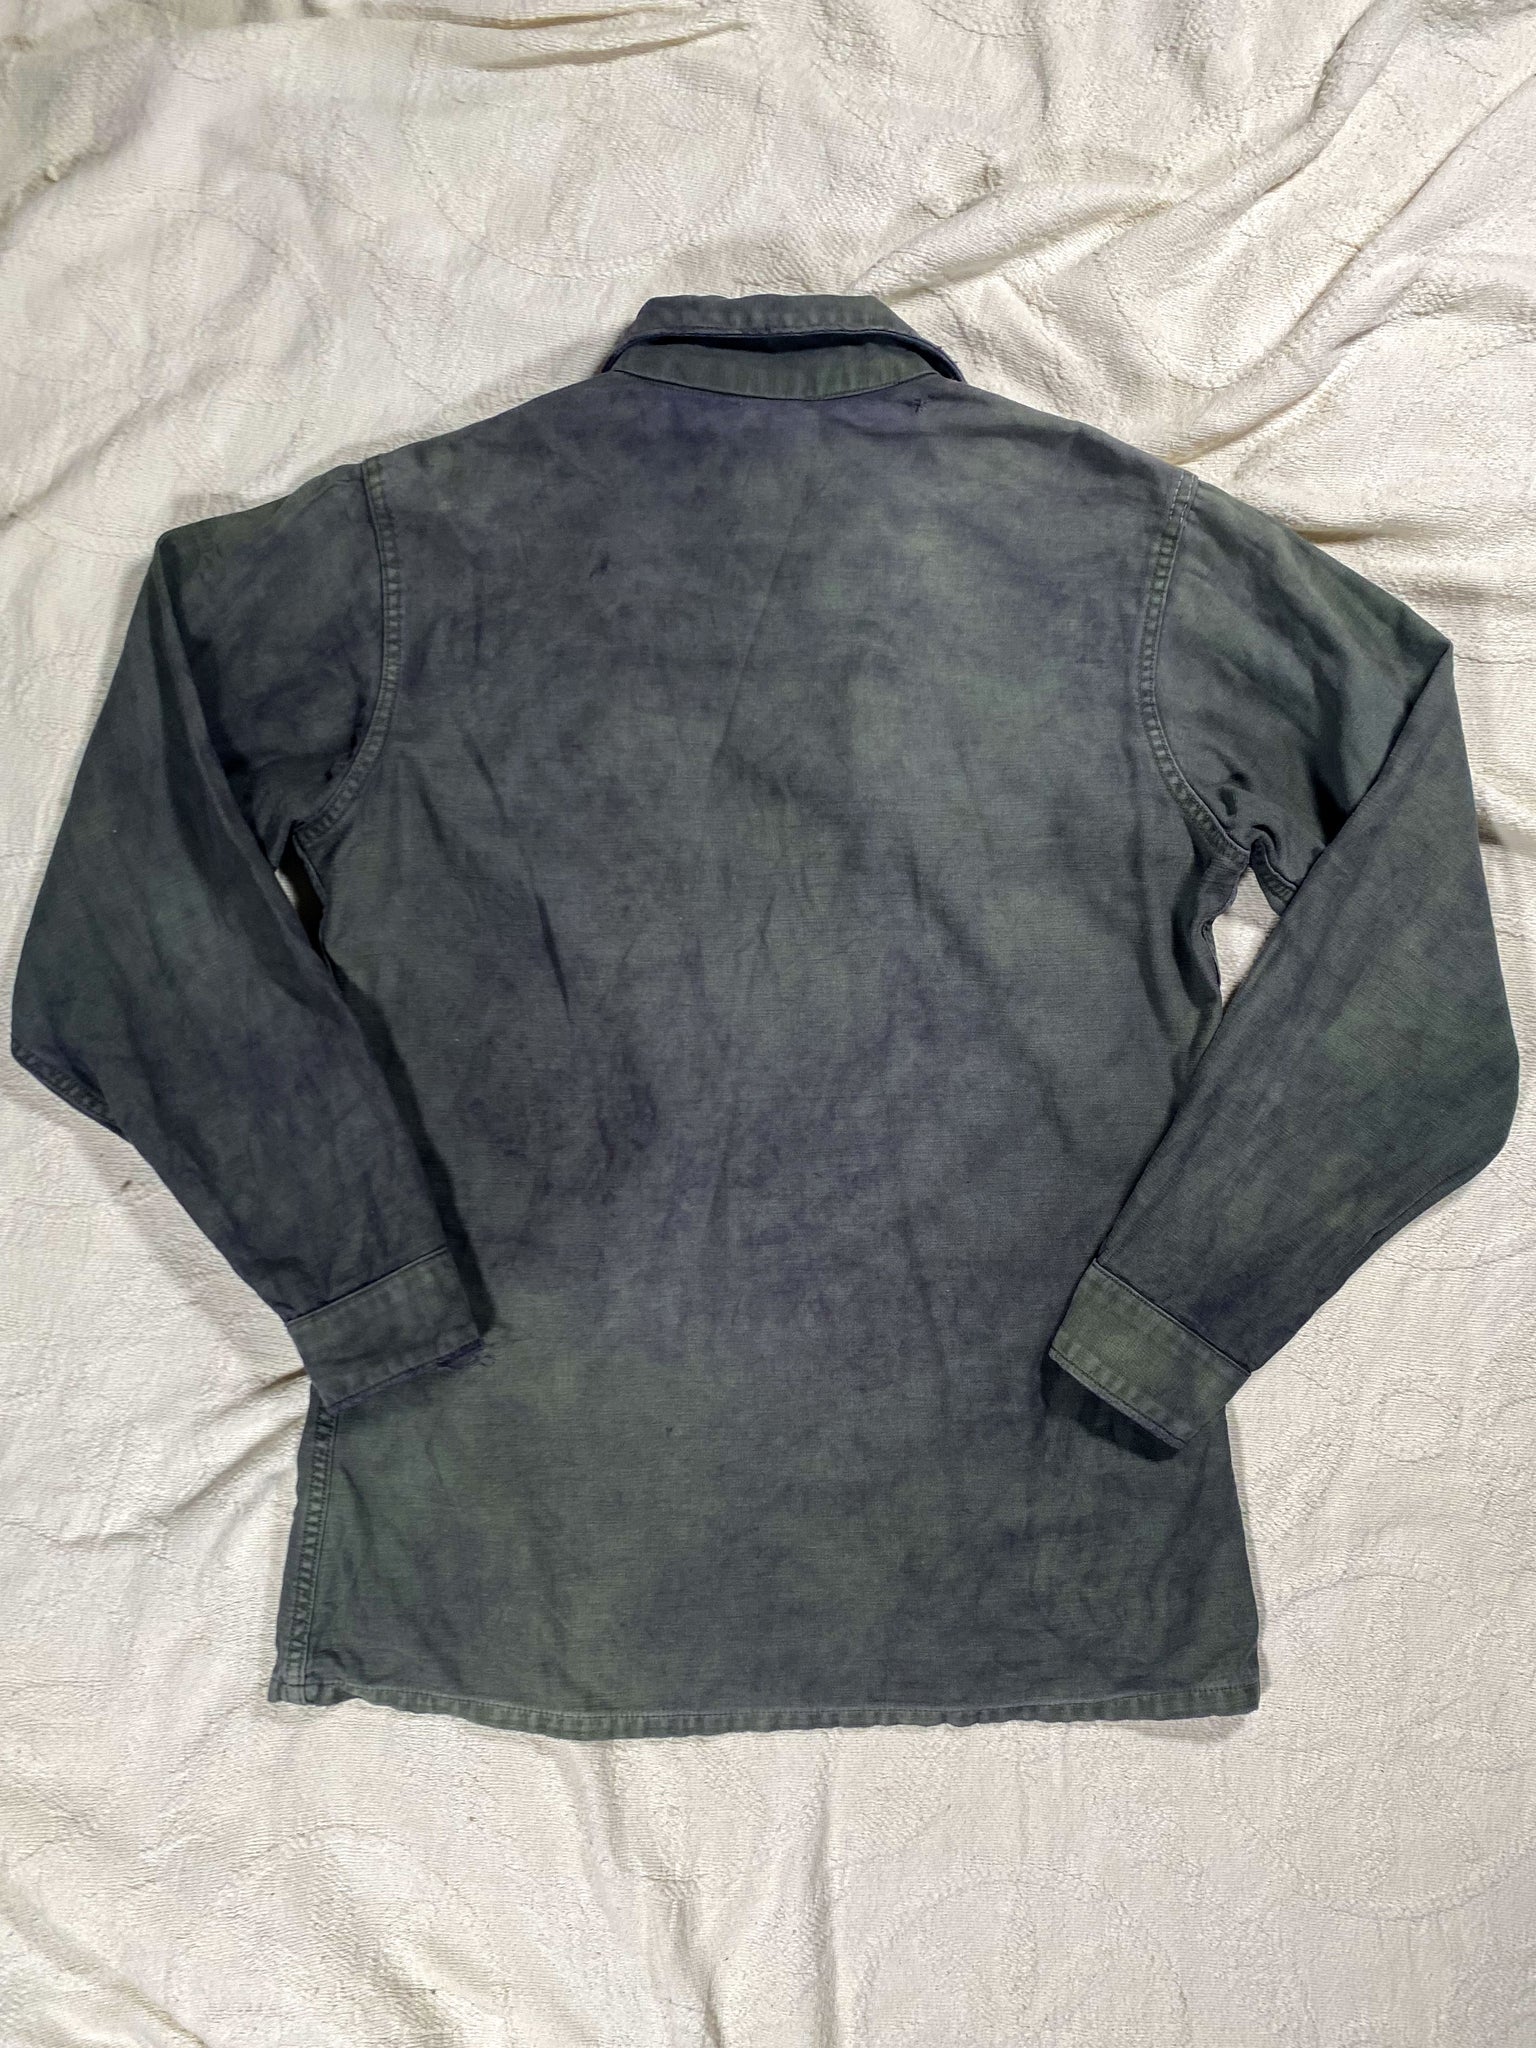 Organic Overdyed Black Vintage 50s Repaired Military Field Shirt (Unisex US Small)